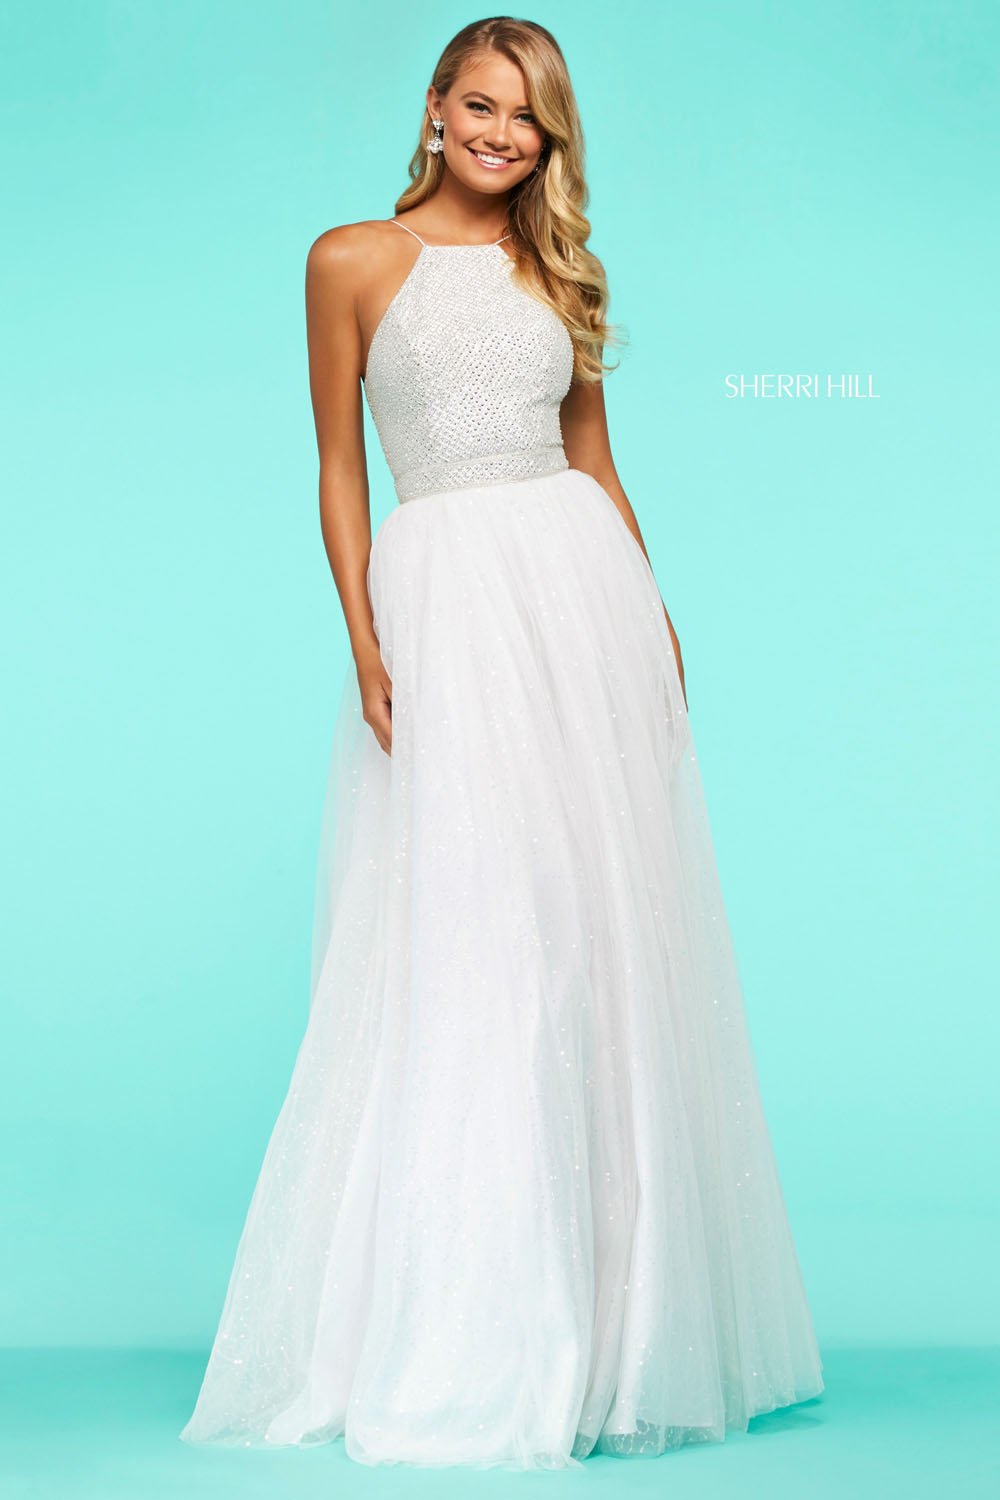 Sherri Hill 53618 dress images in these colors: Ivory Silver.